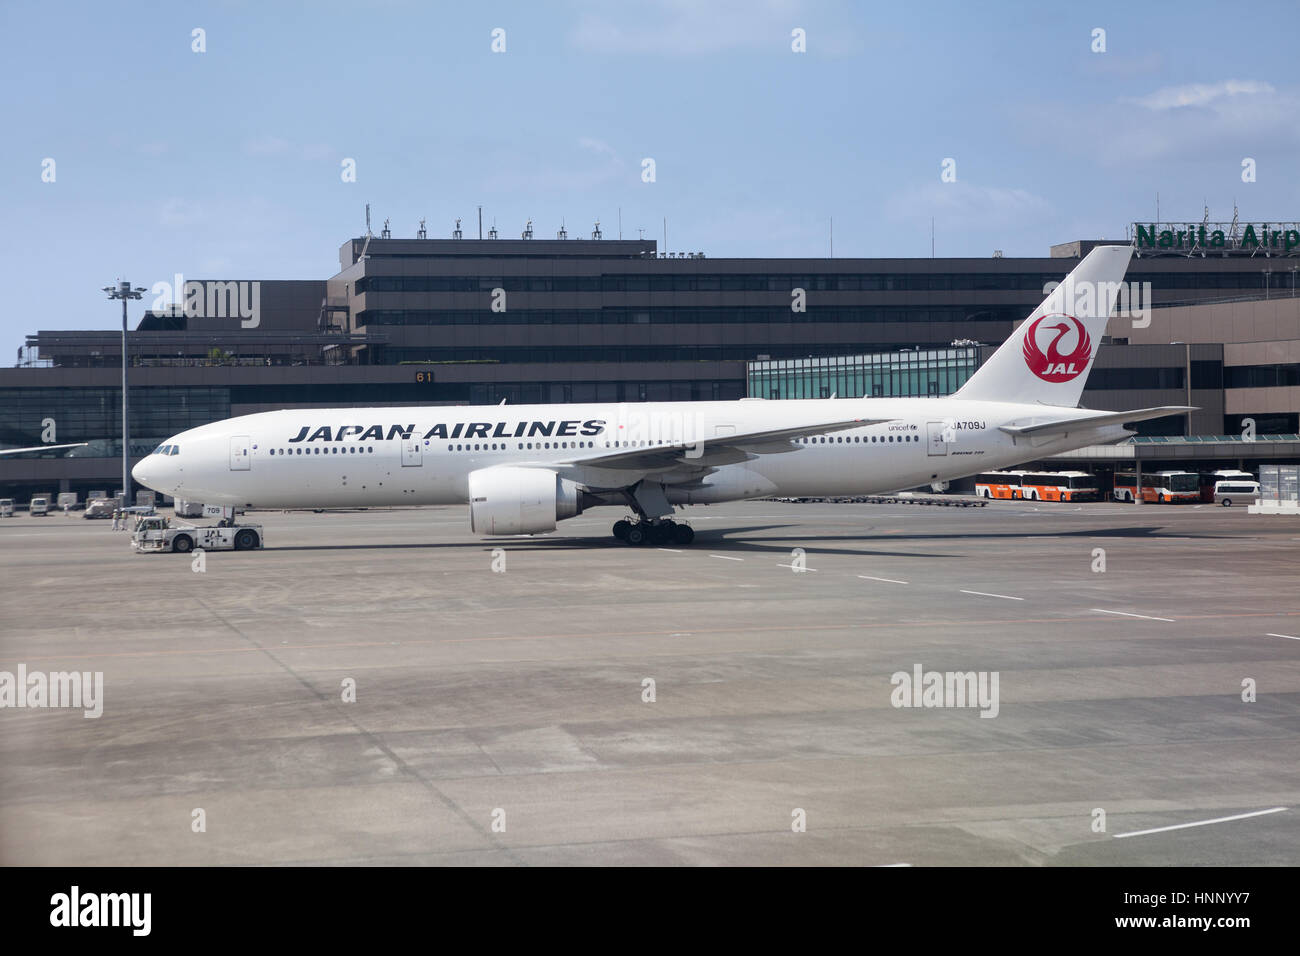 NARITA, JAPAN - CIRCA APR, 2013: Boeing 777 of JAL airline is under towing on runway in the Narita International Airport. Japan Airlines (JAL) is the  Stock Photo